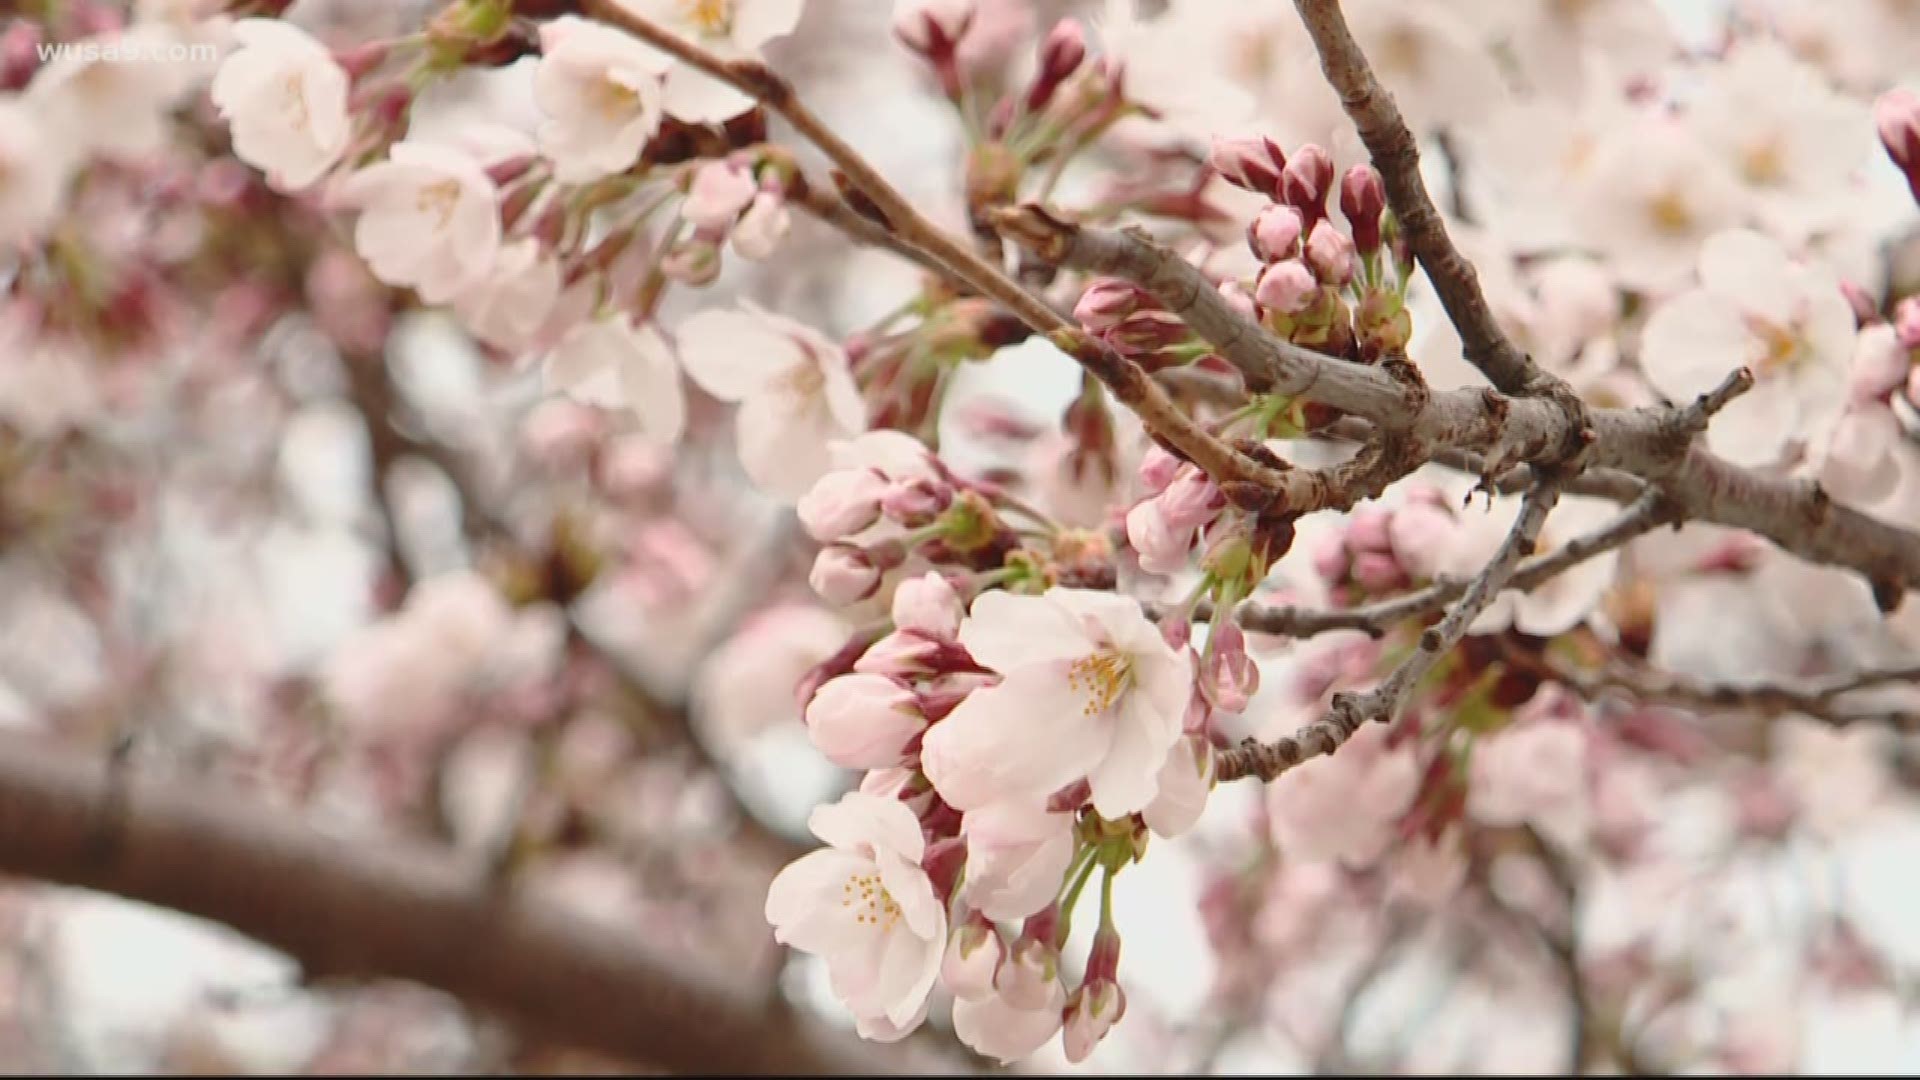 National Cherry Blossom Festival leaders and city officials announced plans to celebrate spring in the District and expected peak bloom dates.